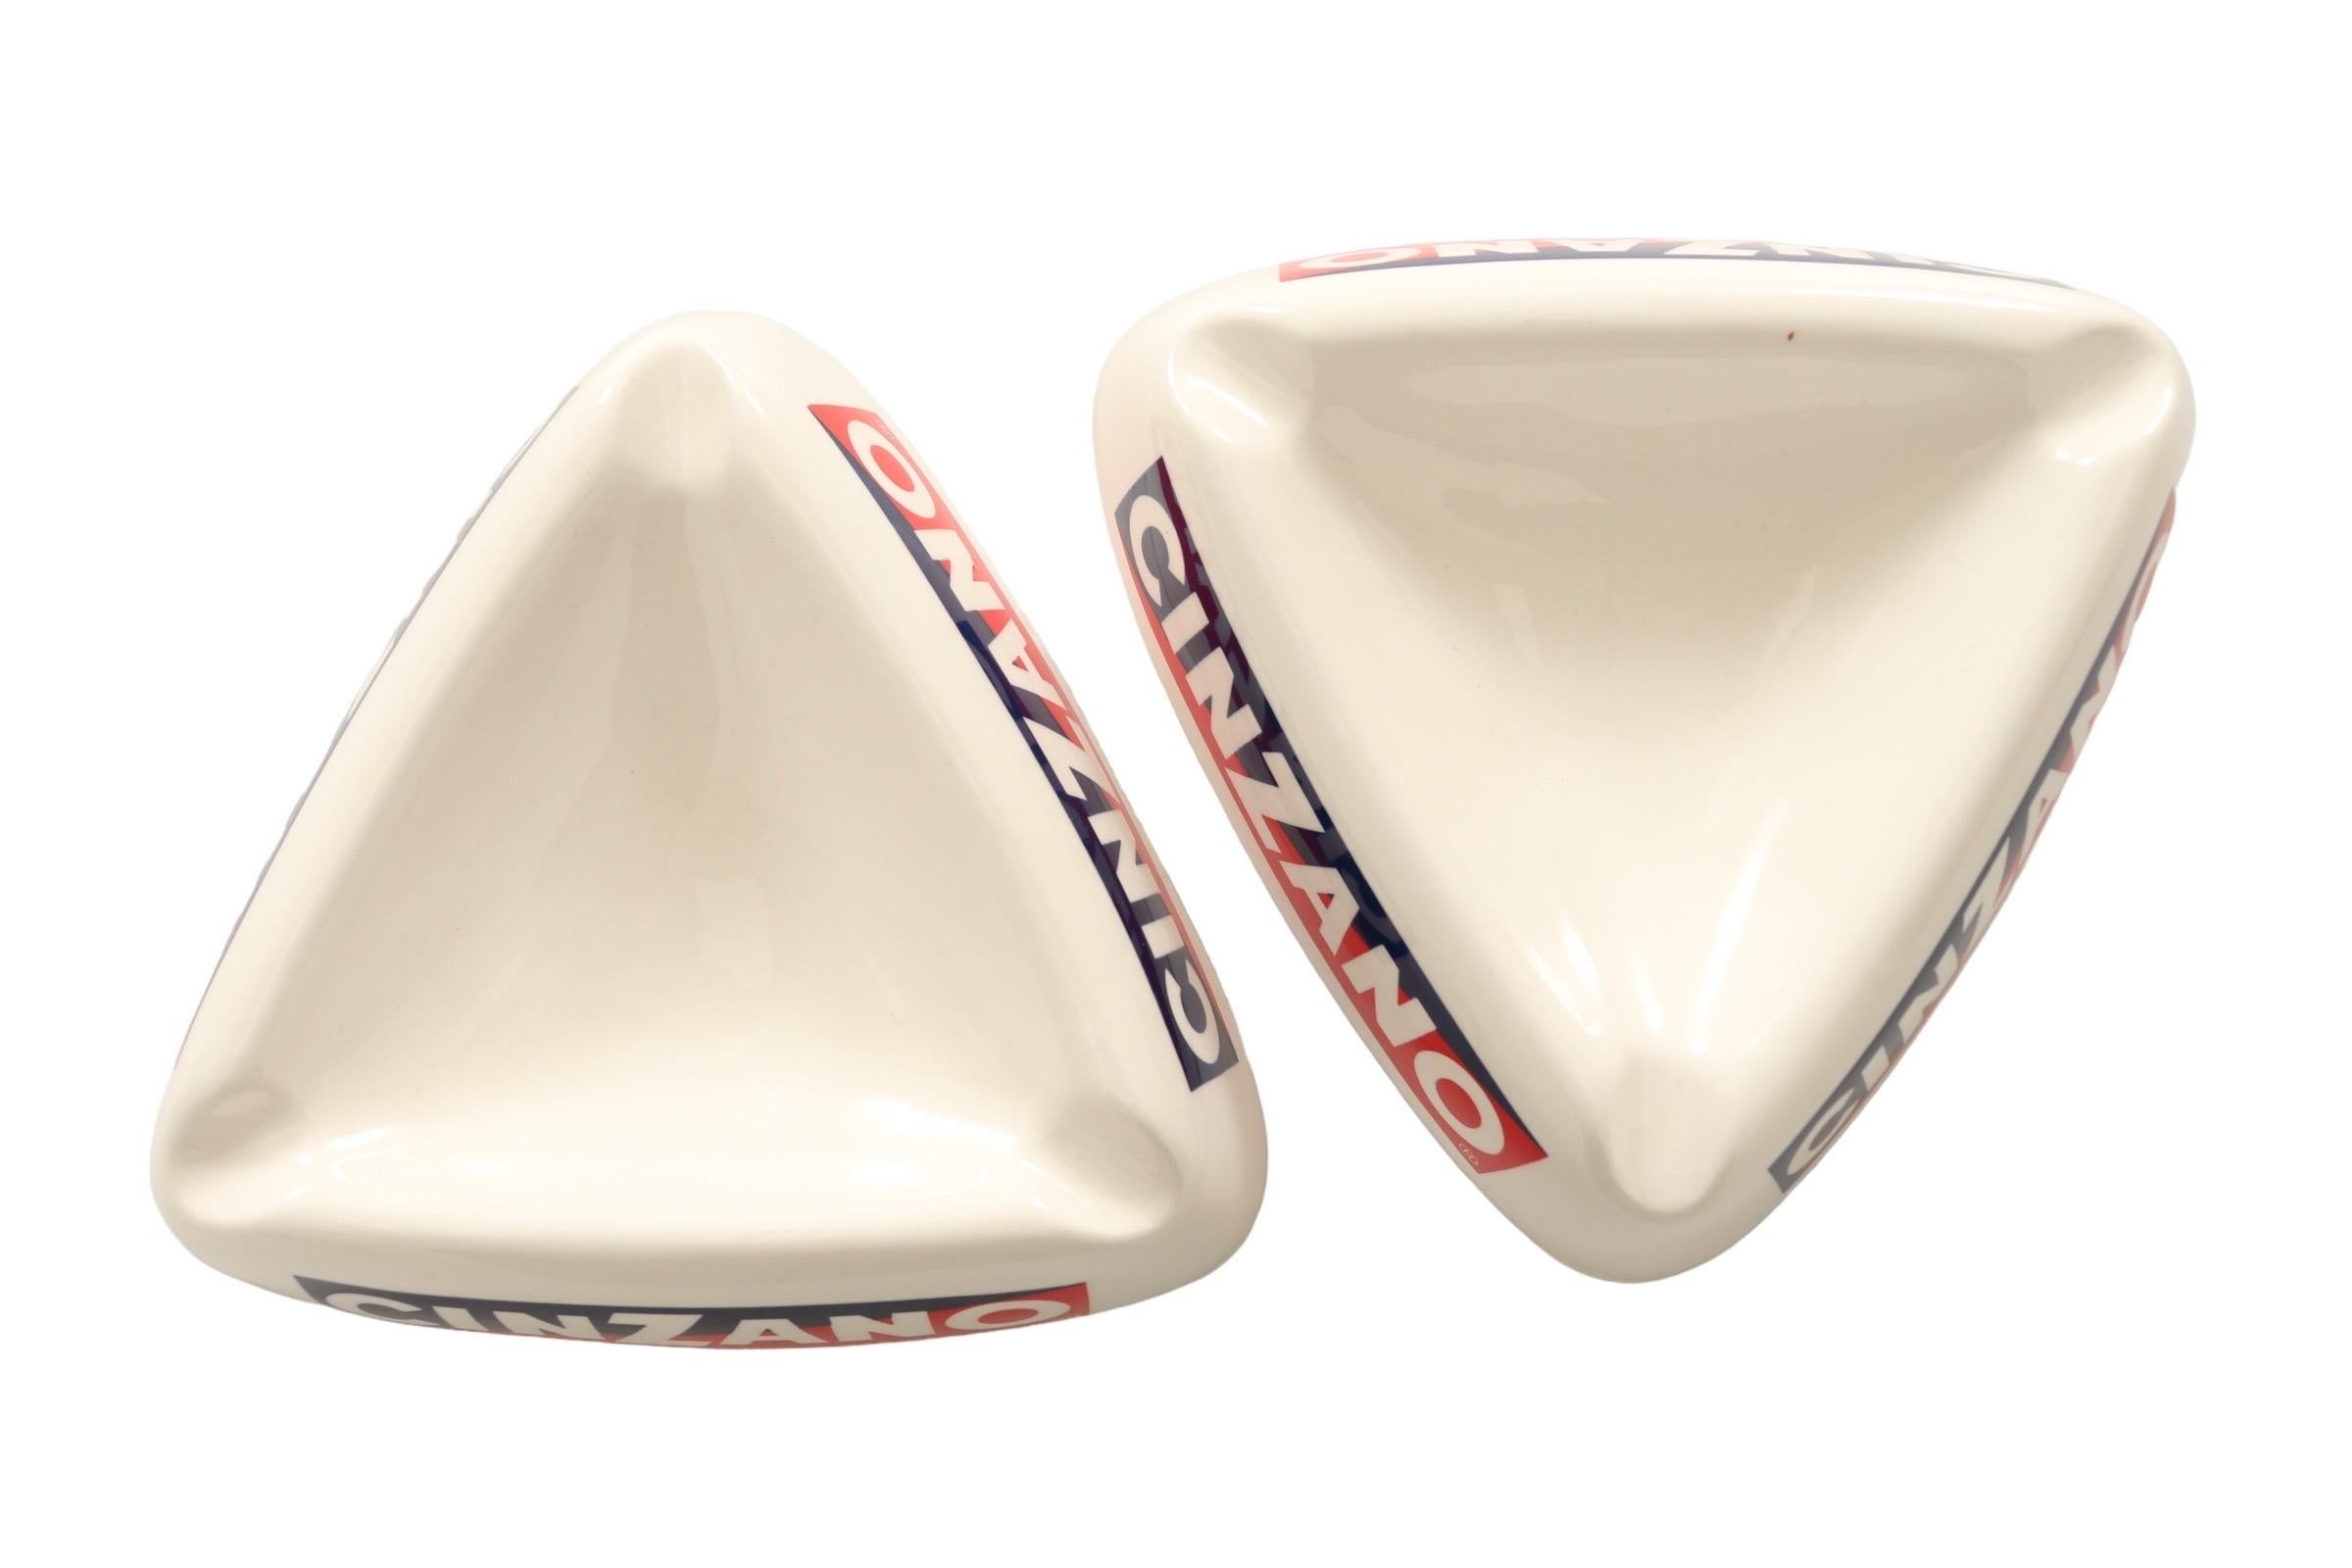 A pair of triangular ceramic ashtrays with the distinctive Cinzano logo in red, white and blue on all three sides, and a cigarette rest at each corner. Dimensions per ashtray.
 